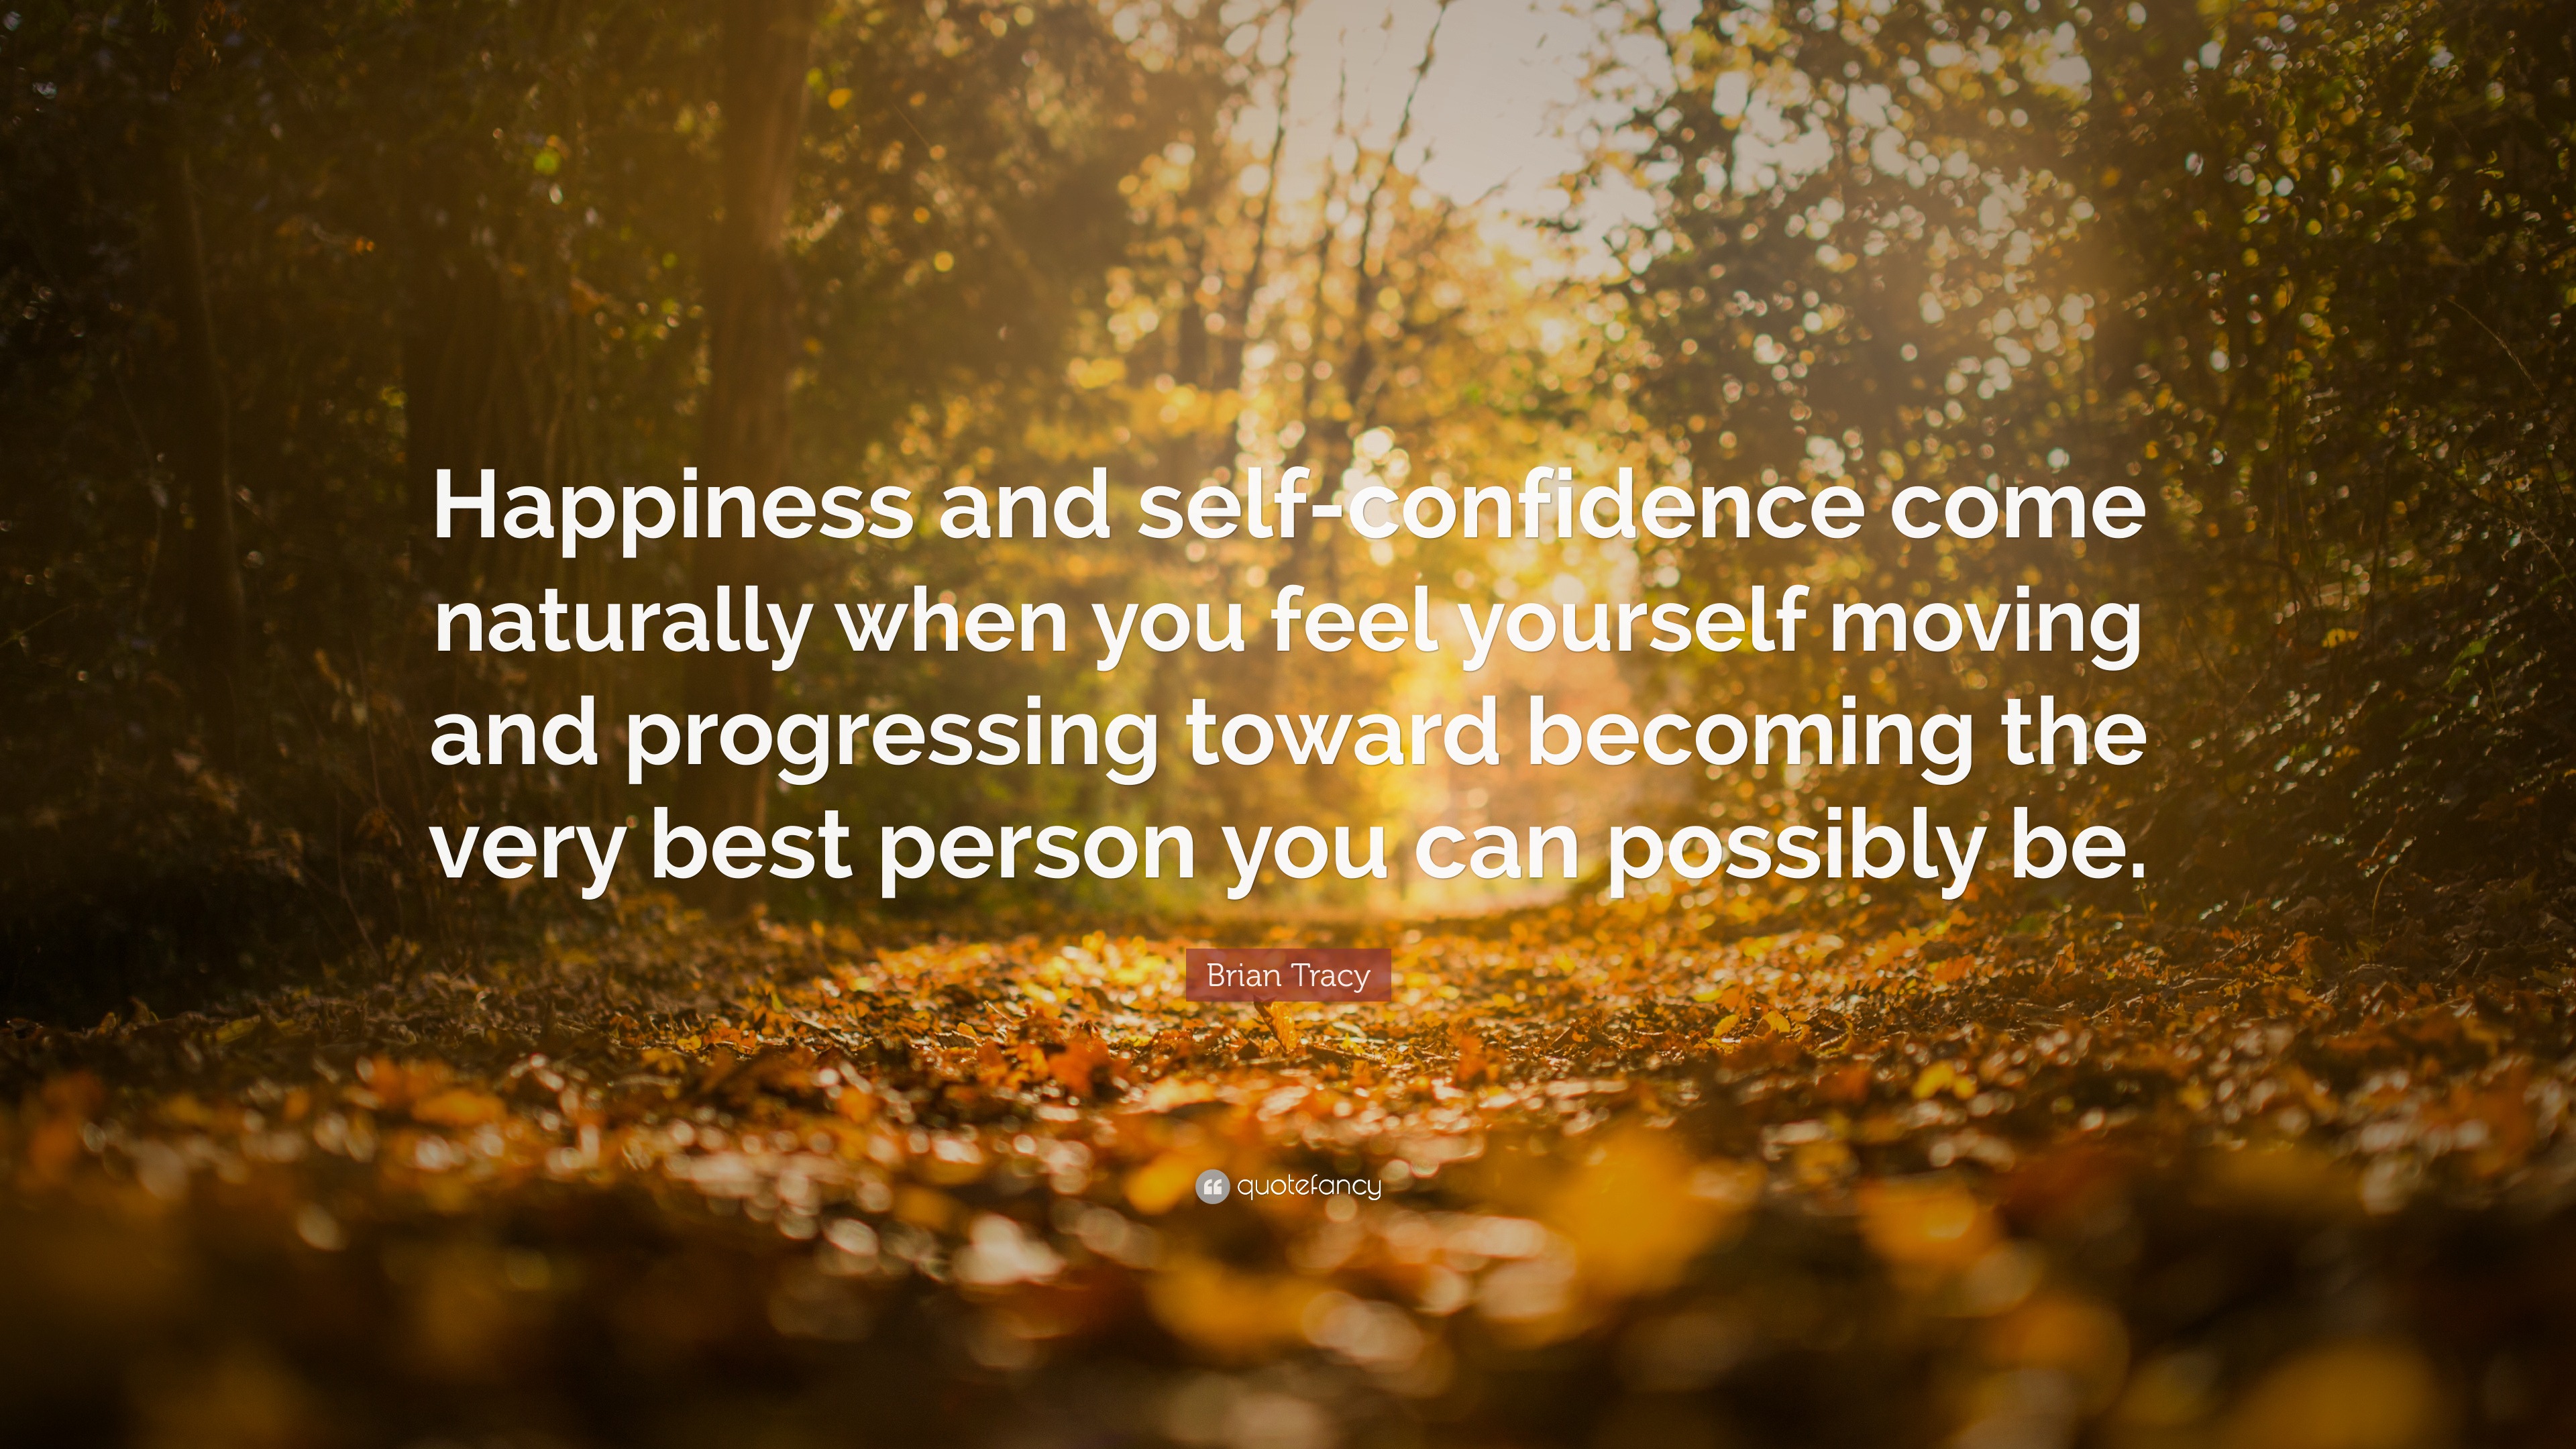 4685591 Brian Tracy Quote Happiness and self confidence come naturally